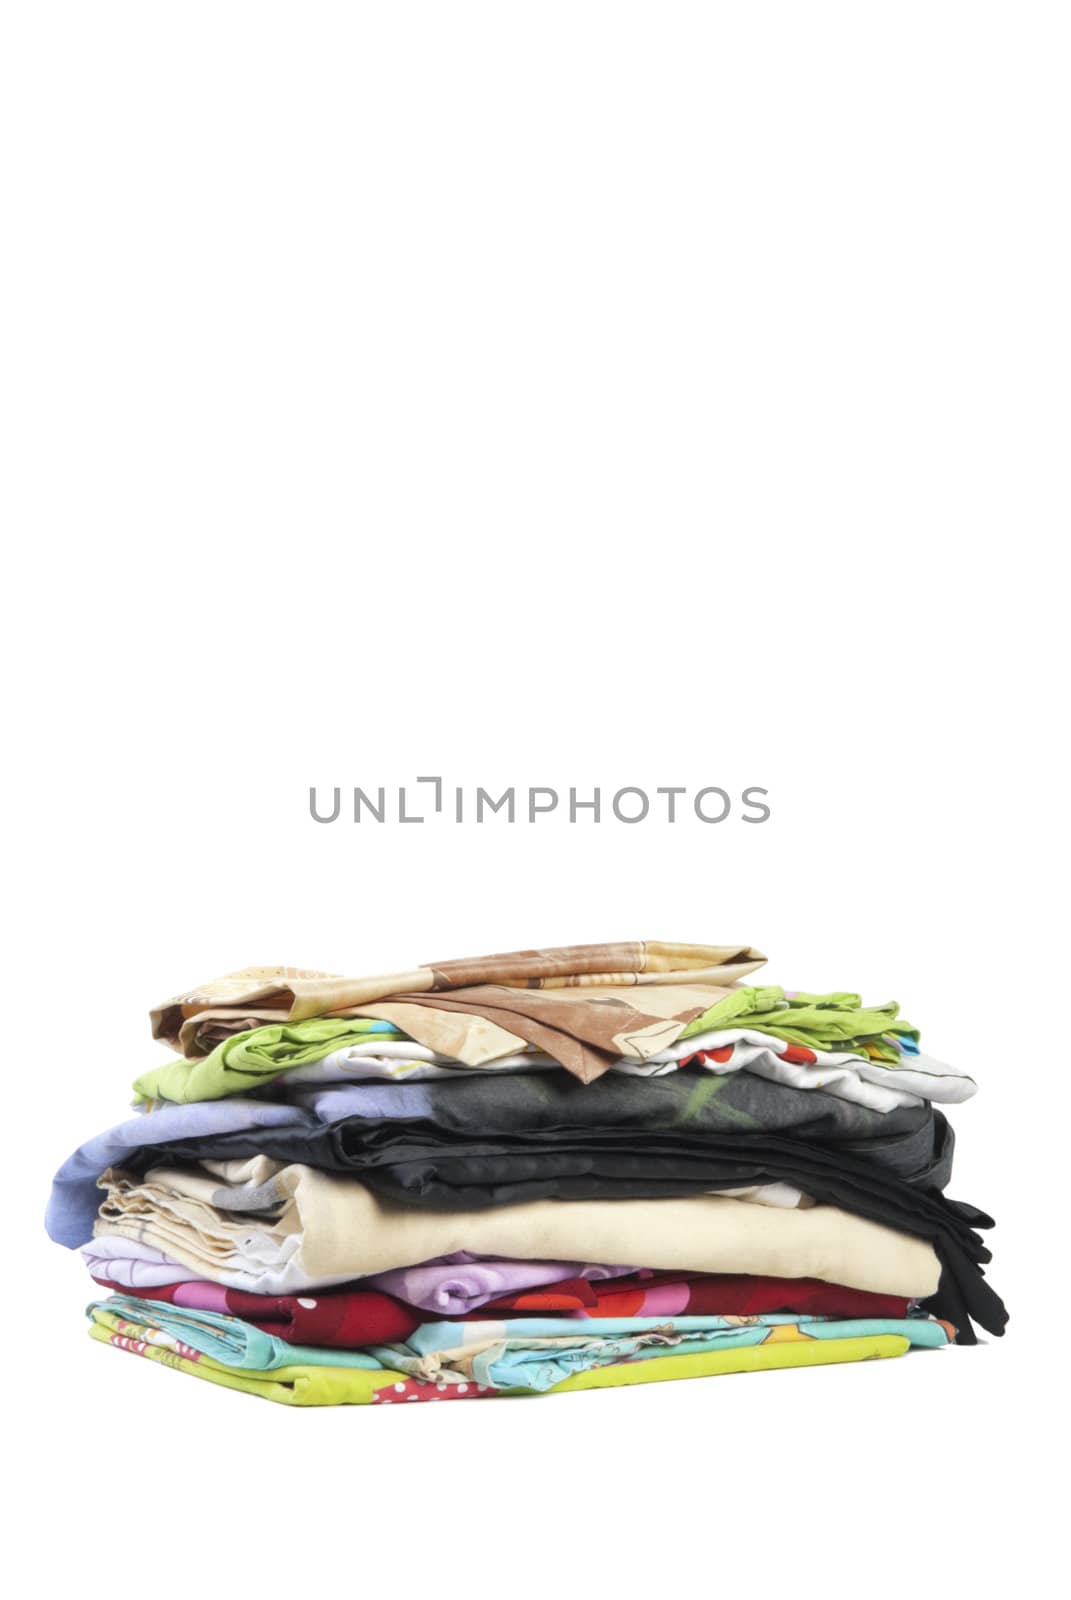 Colorful stack of dirty bed-clothes is ready for laundry. Isolated on white background